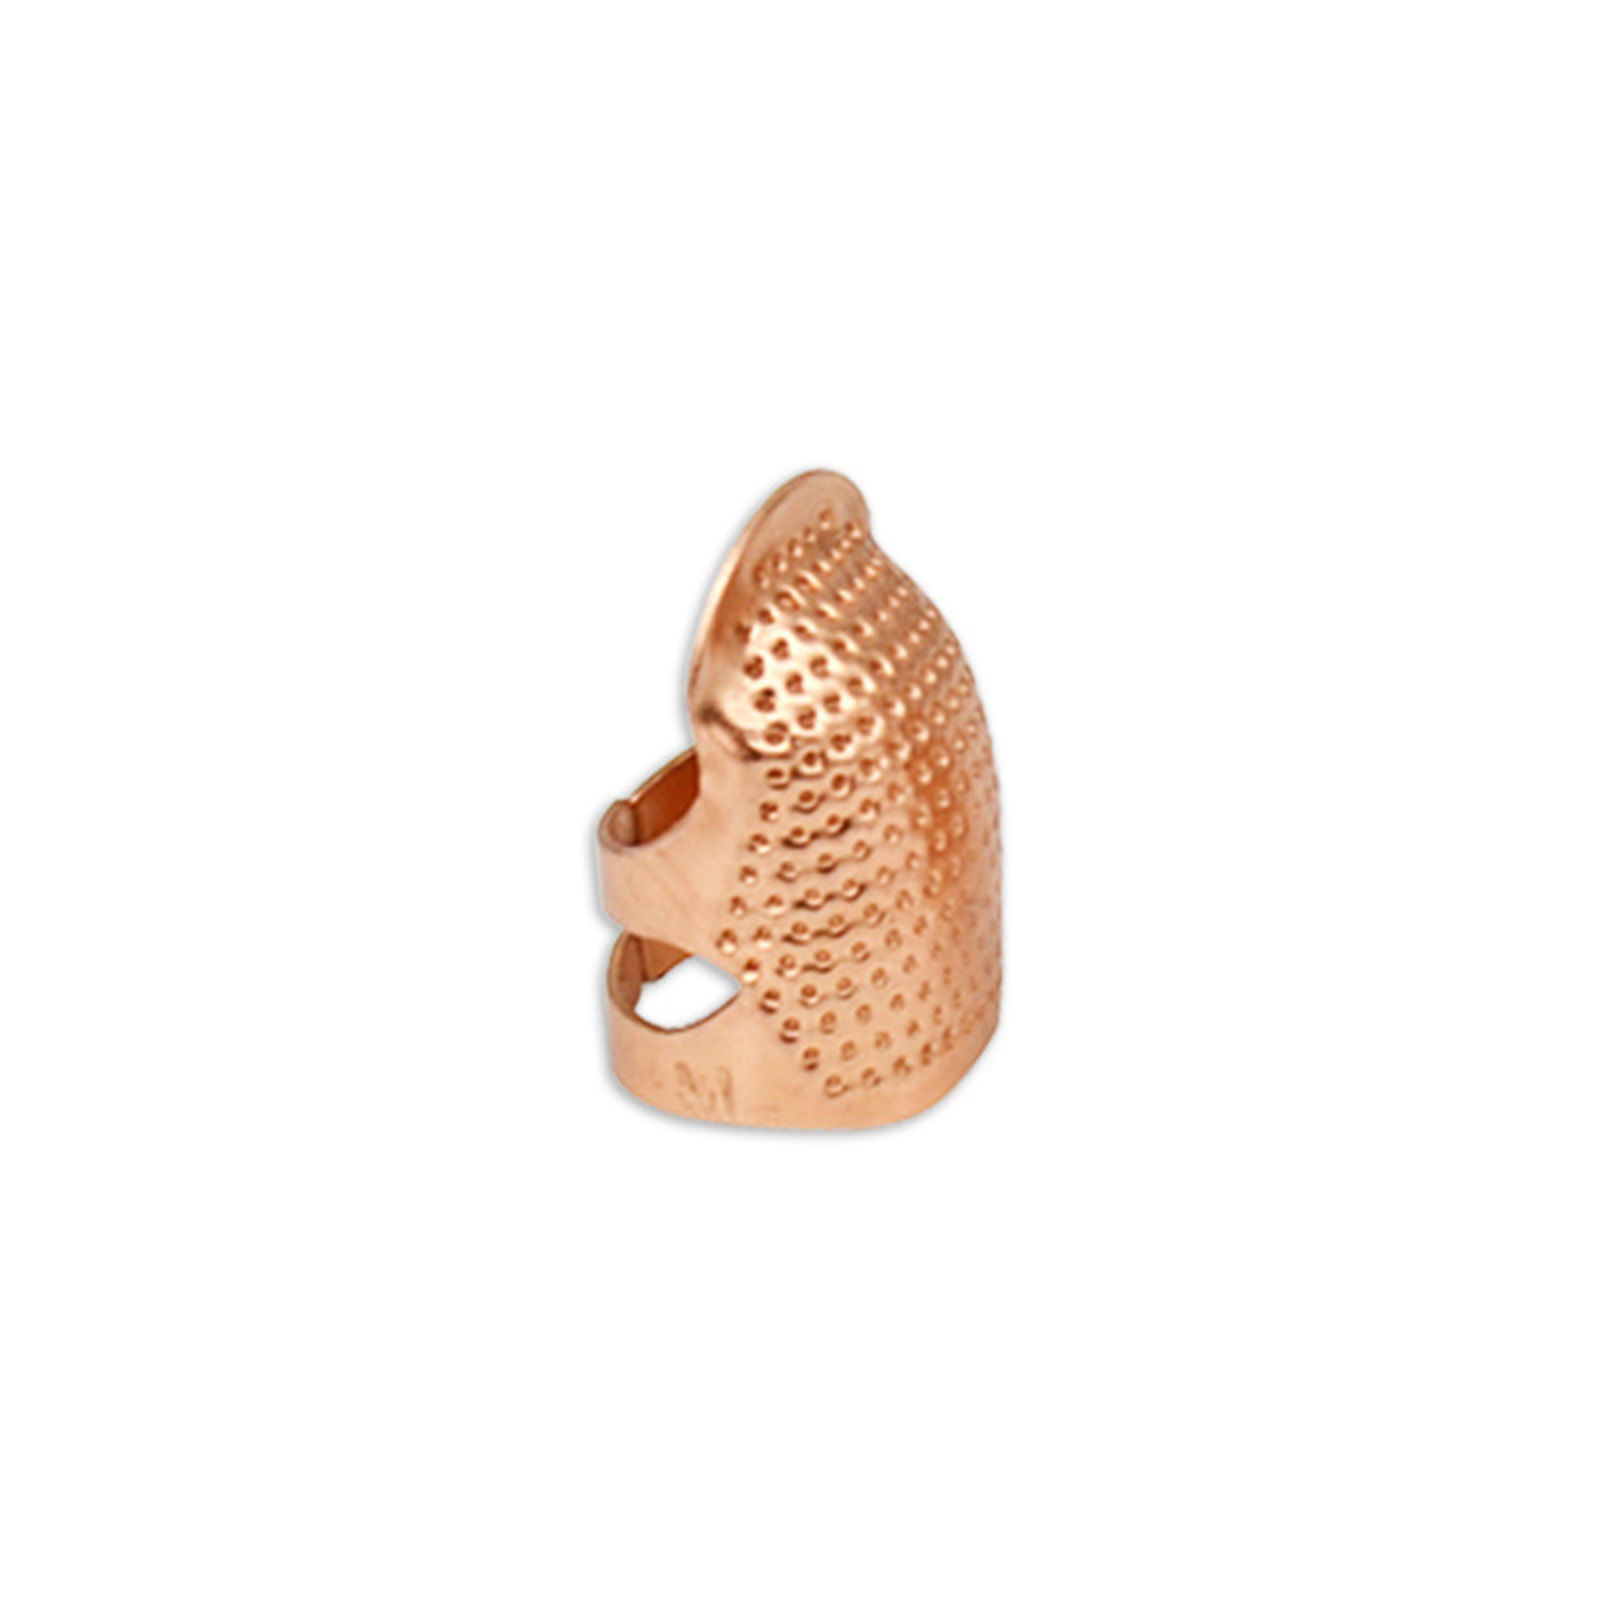 Picture of Brass Finger Thimble Protector Sewing Tools Rose Gold 2.3cm x 1.5cm, 2 PCs